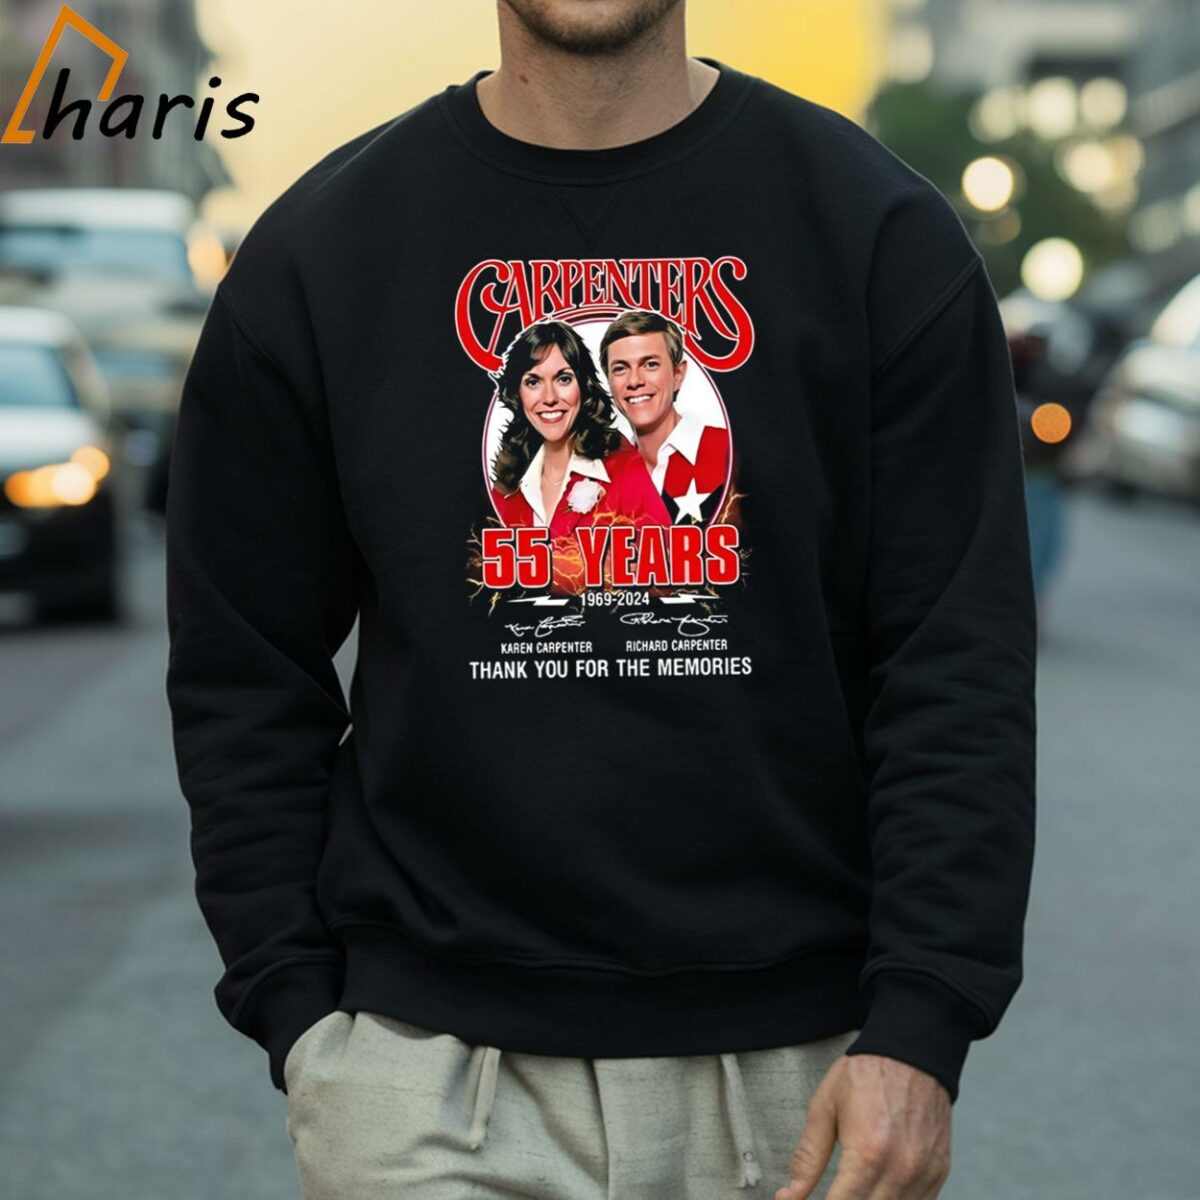 Carpenters 55 Years 1969 2024 Thank You For The Memories Signatures T shirt 4 Sweatshirt